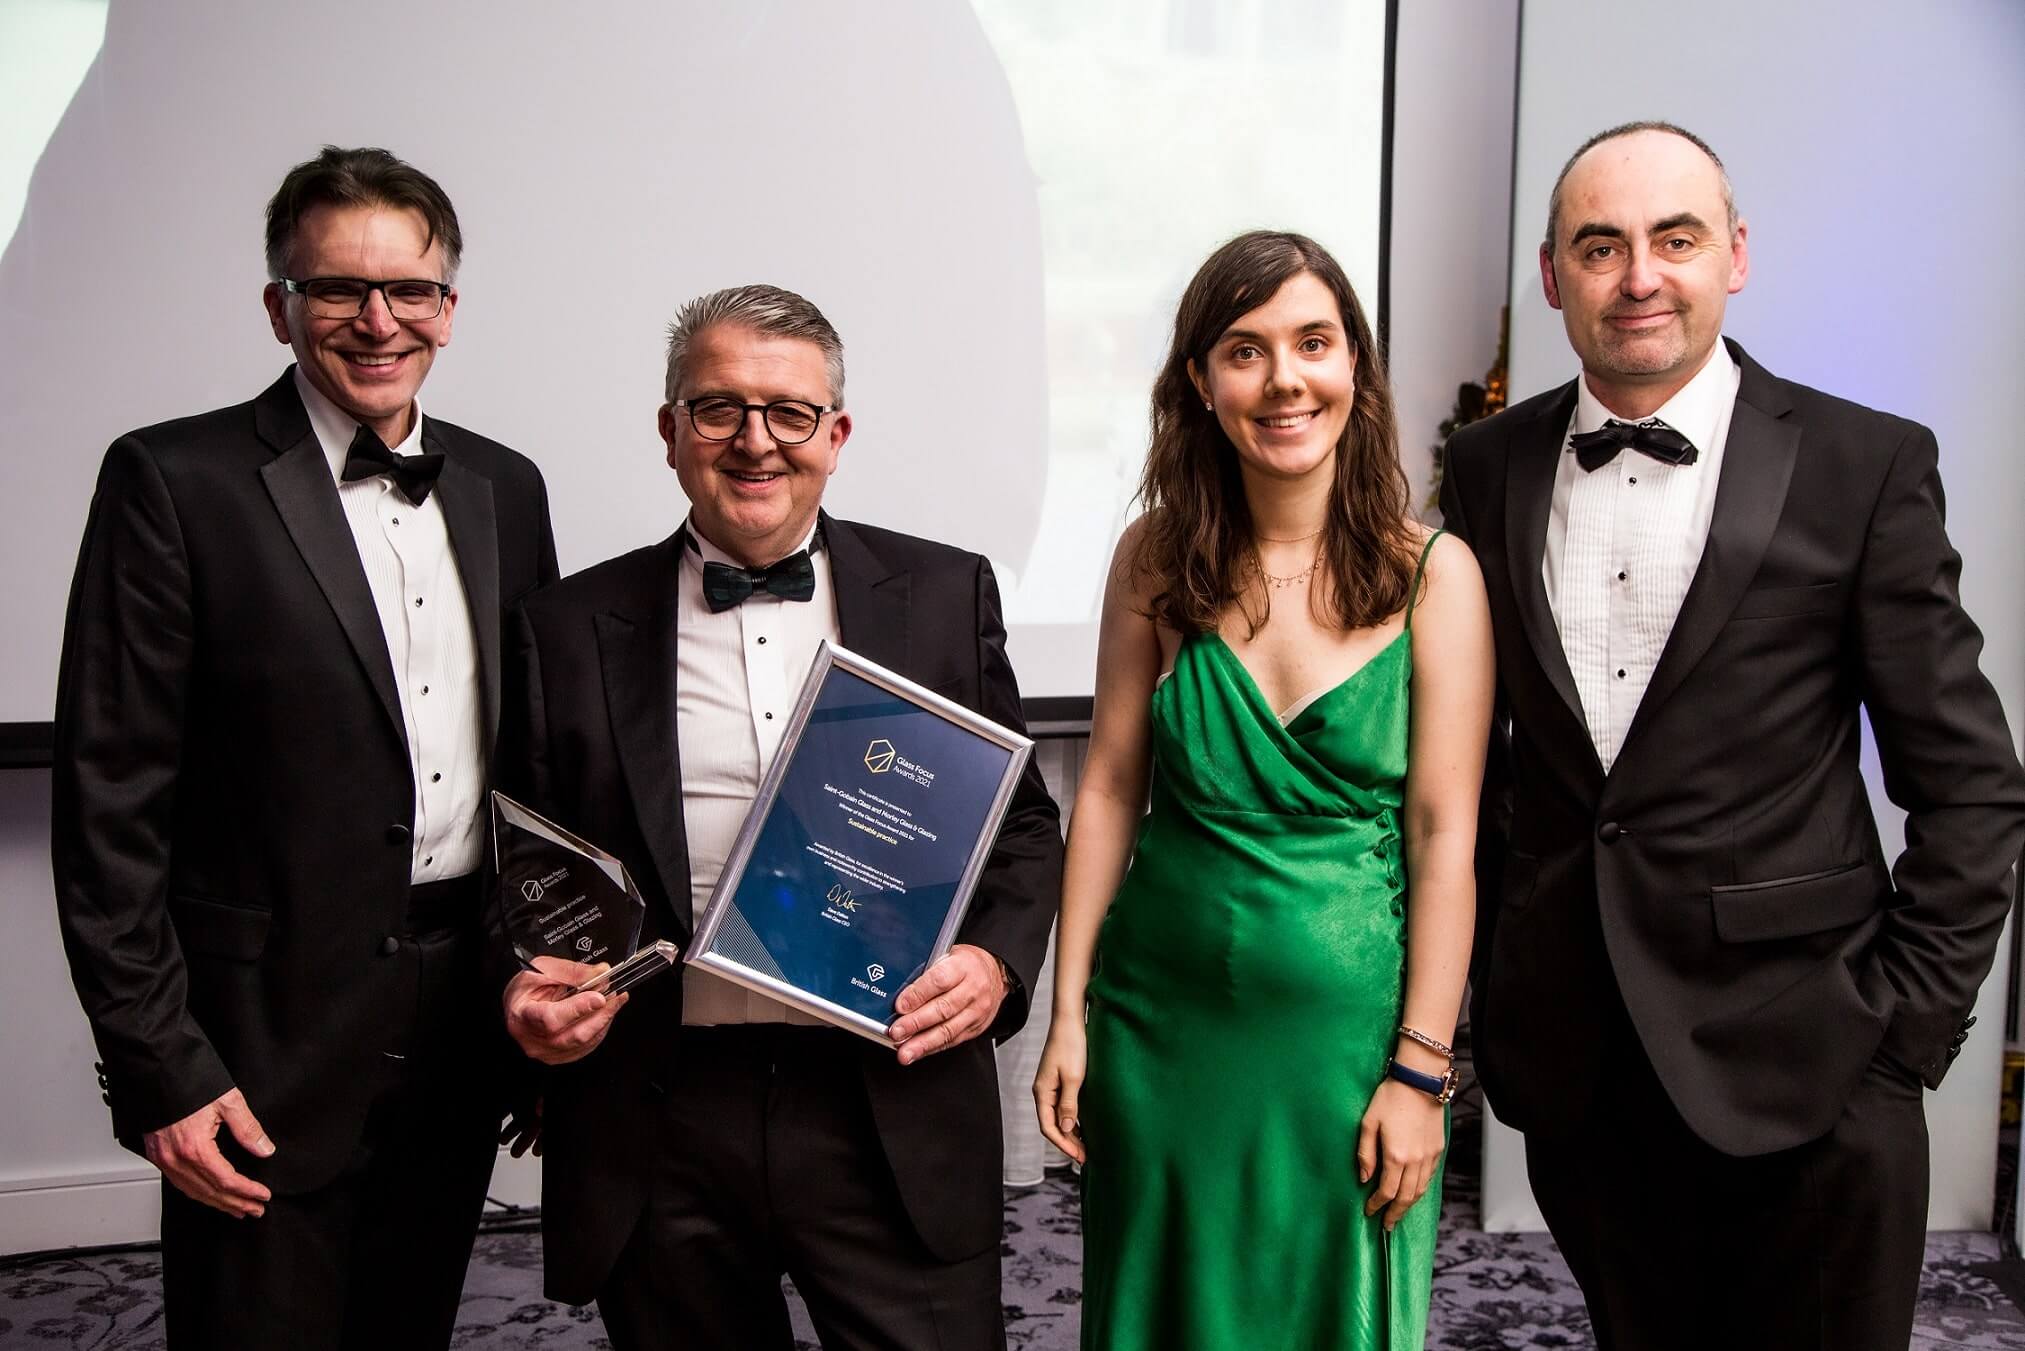 Joint Saint-Gobain Glass and Morley Glass initiative wins top glass industry sustainability award